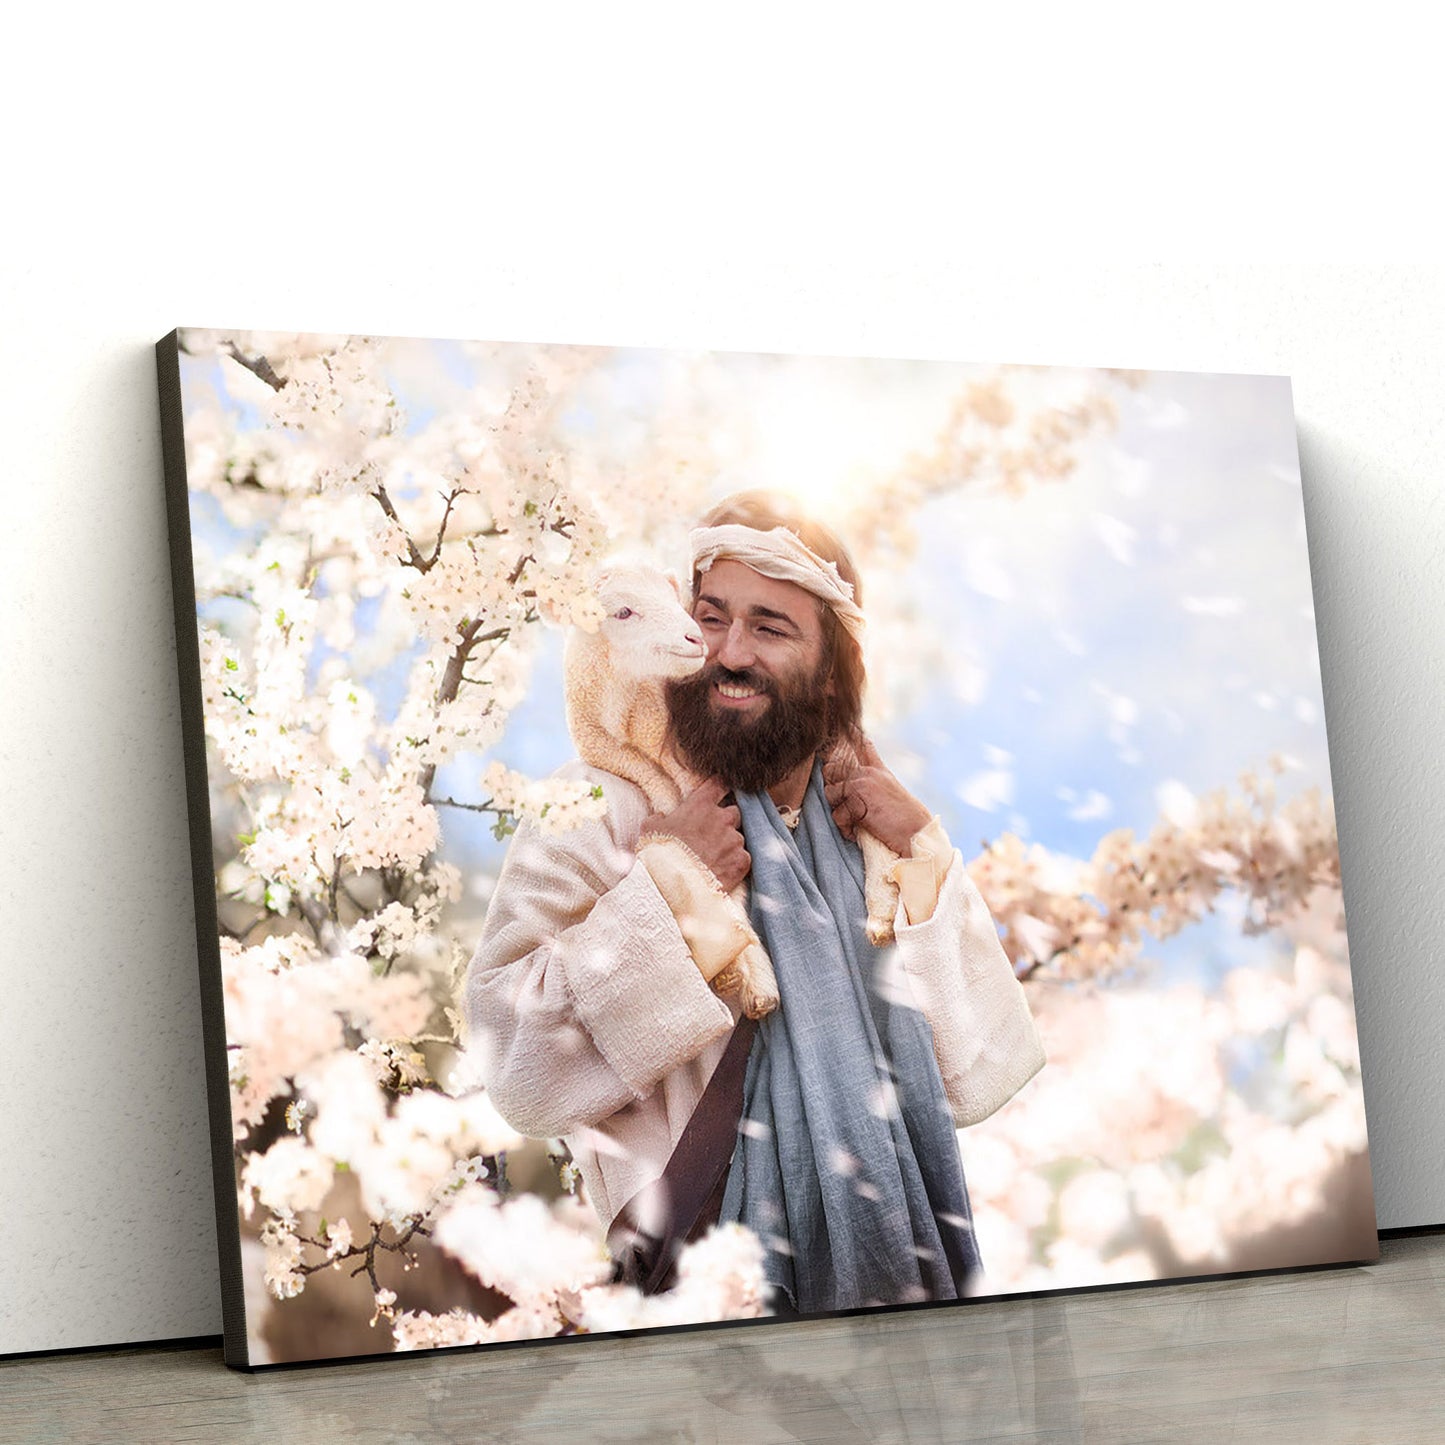 Found Canvas Picture - Jesus Canvas Wall Art - Christian Wall Art